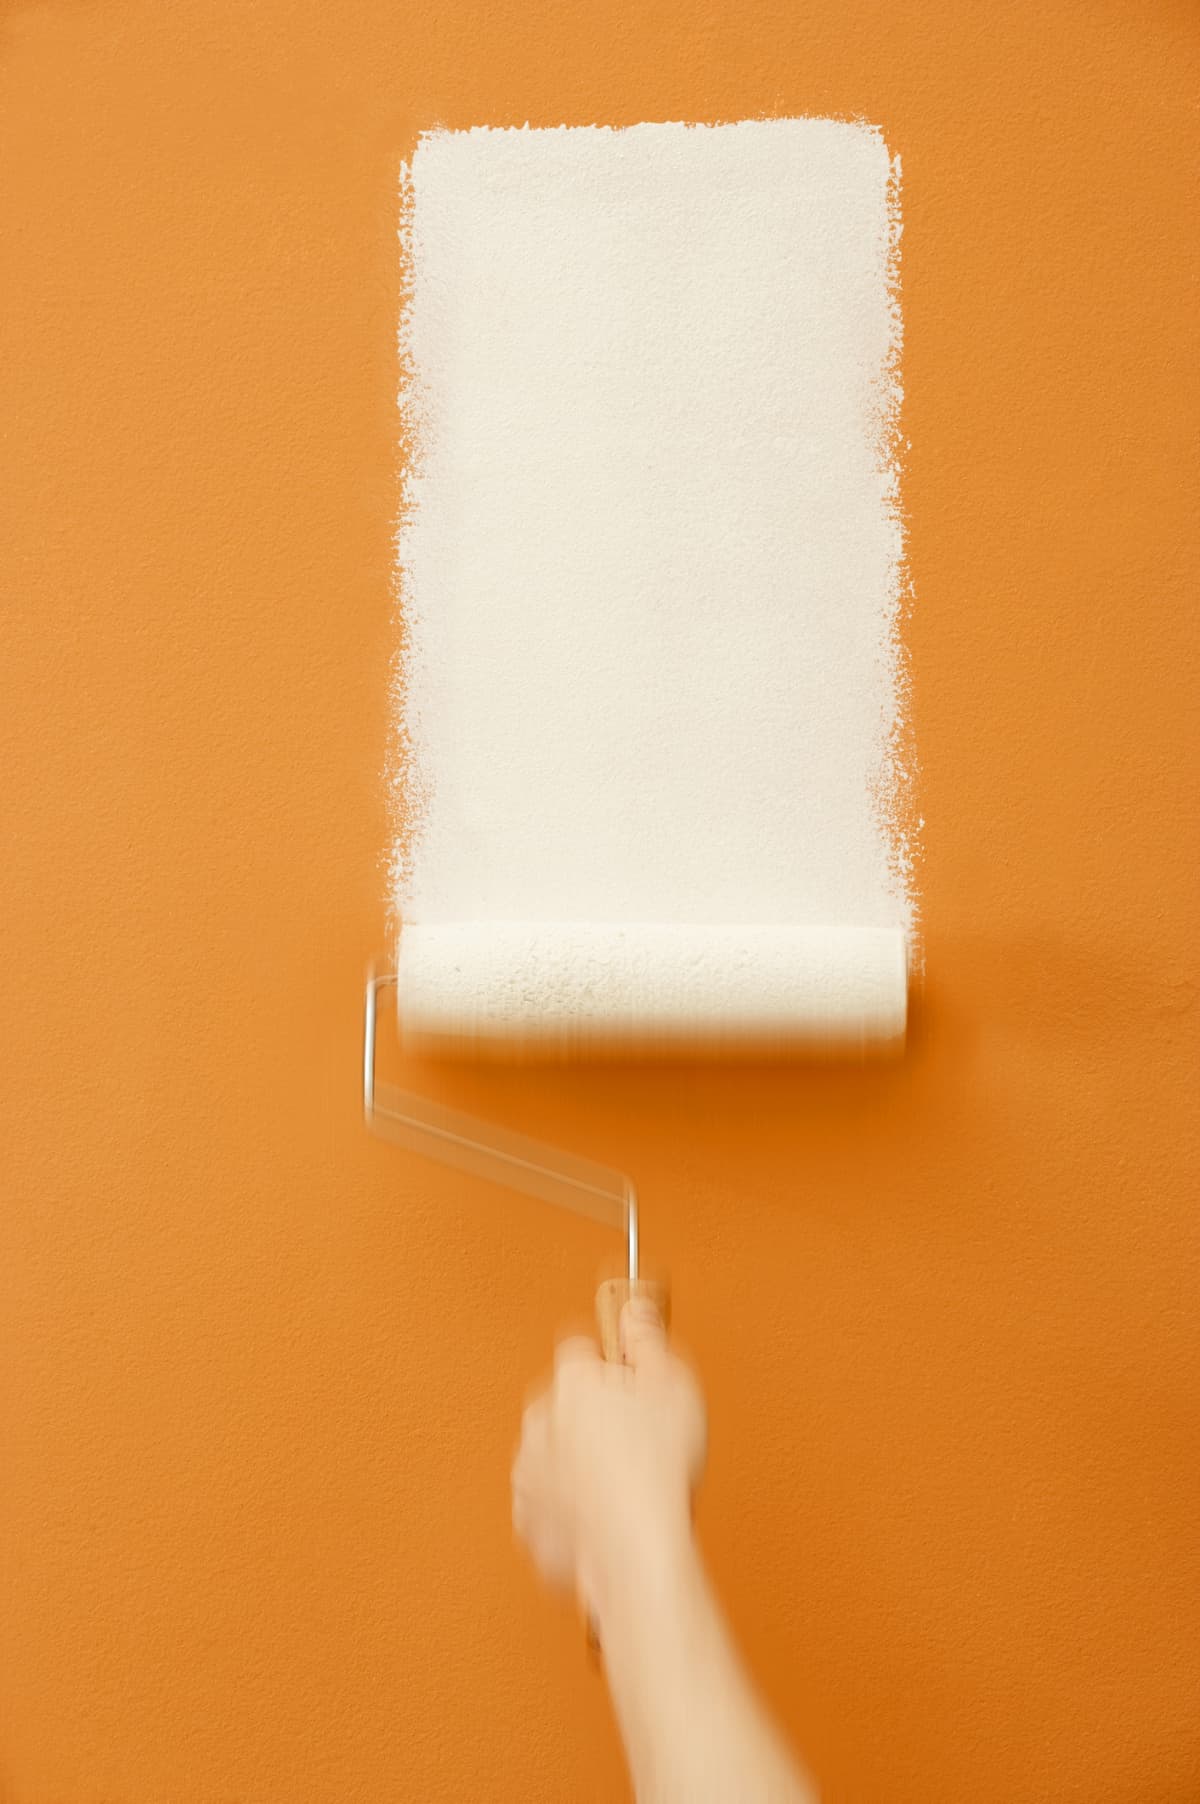 HAND HOLDING PAINT ROLLER APPLYING WHITE PAINT TO ORANGE WALL